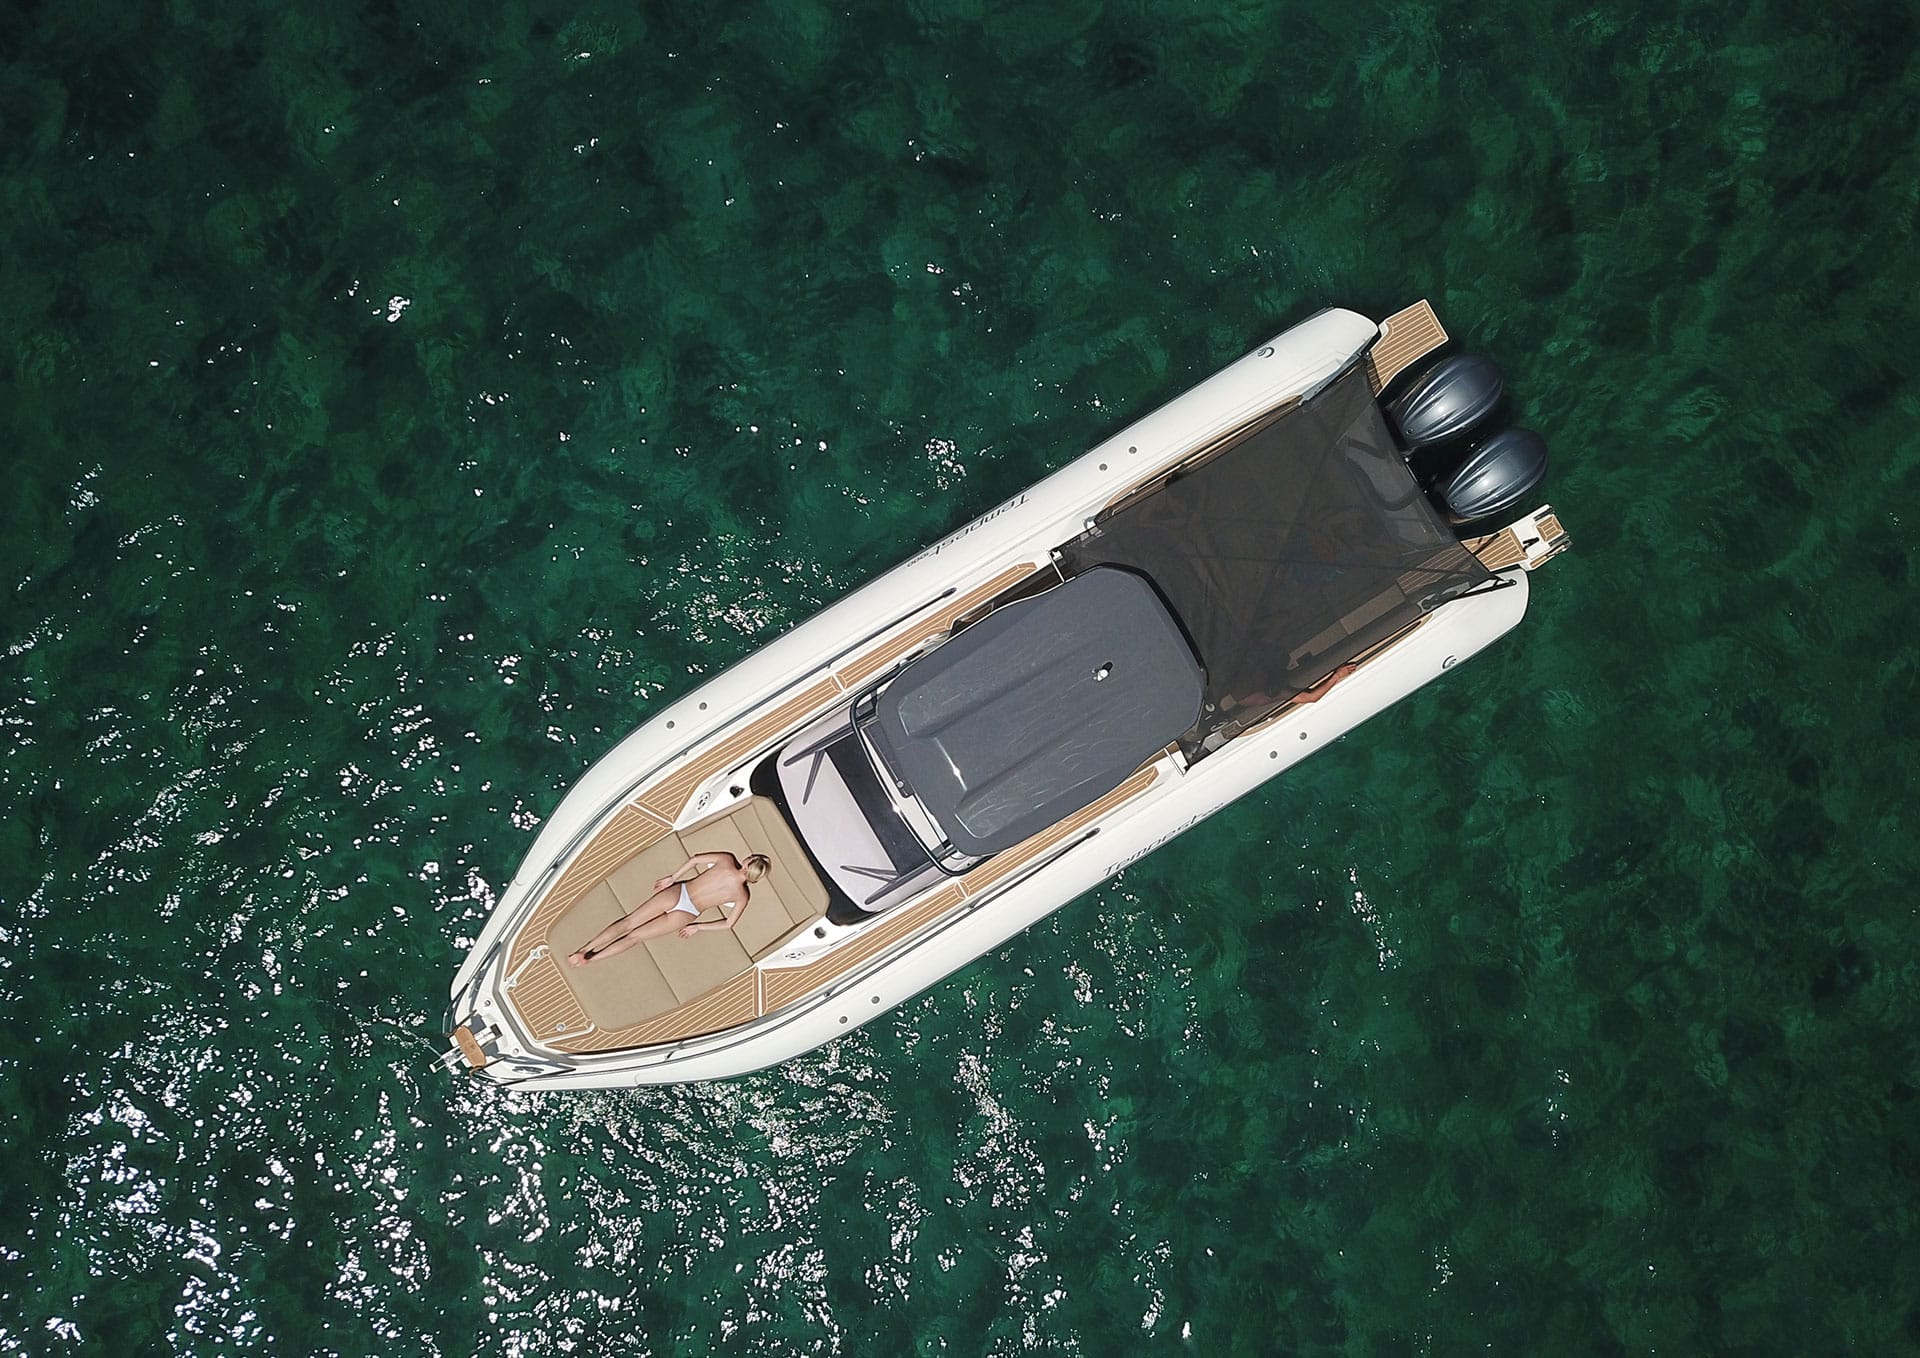 close up image of Bimini stern area with 2 carbon pylons